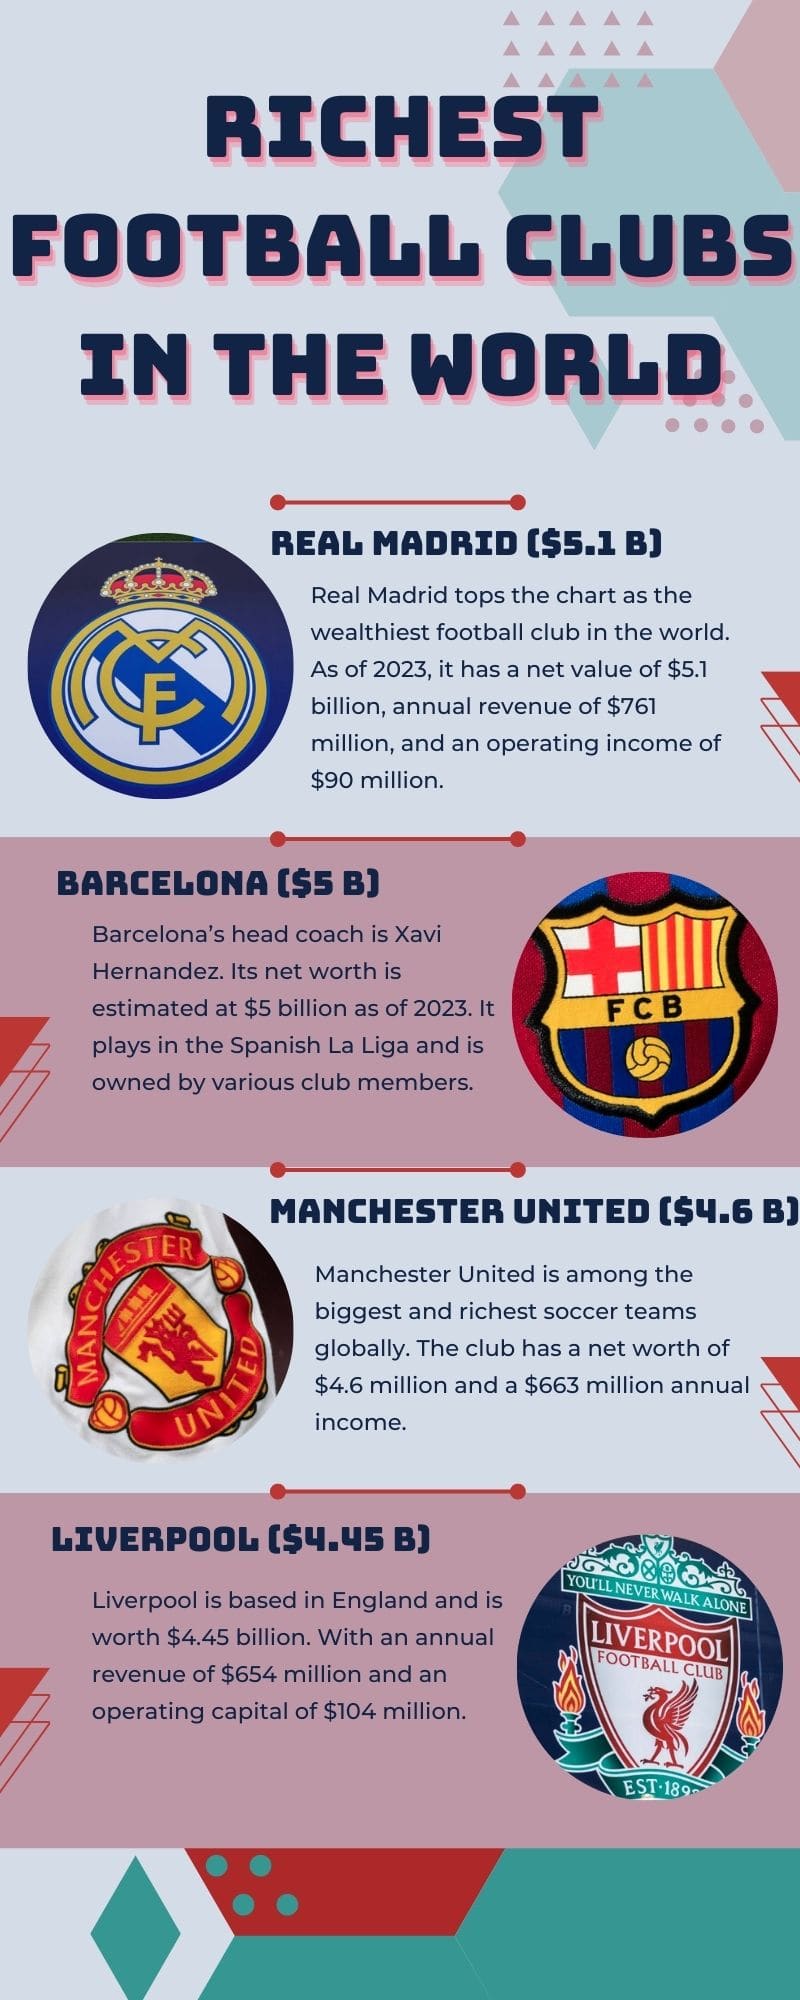 Richest football club in the world